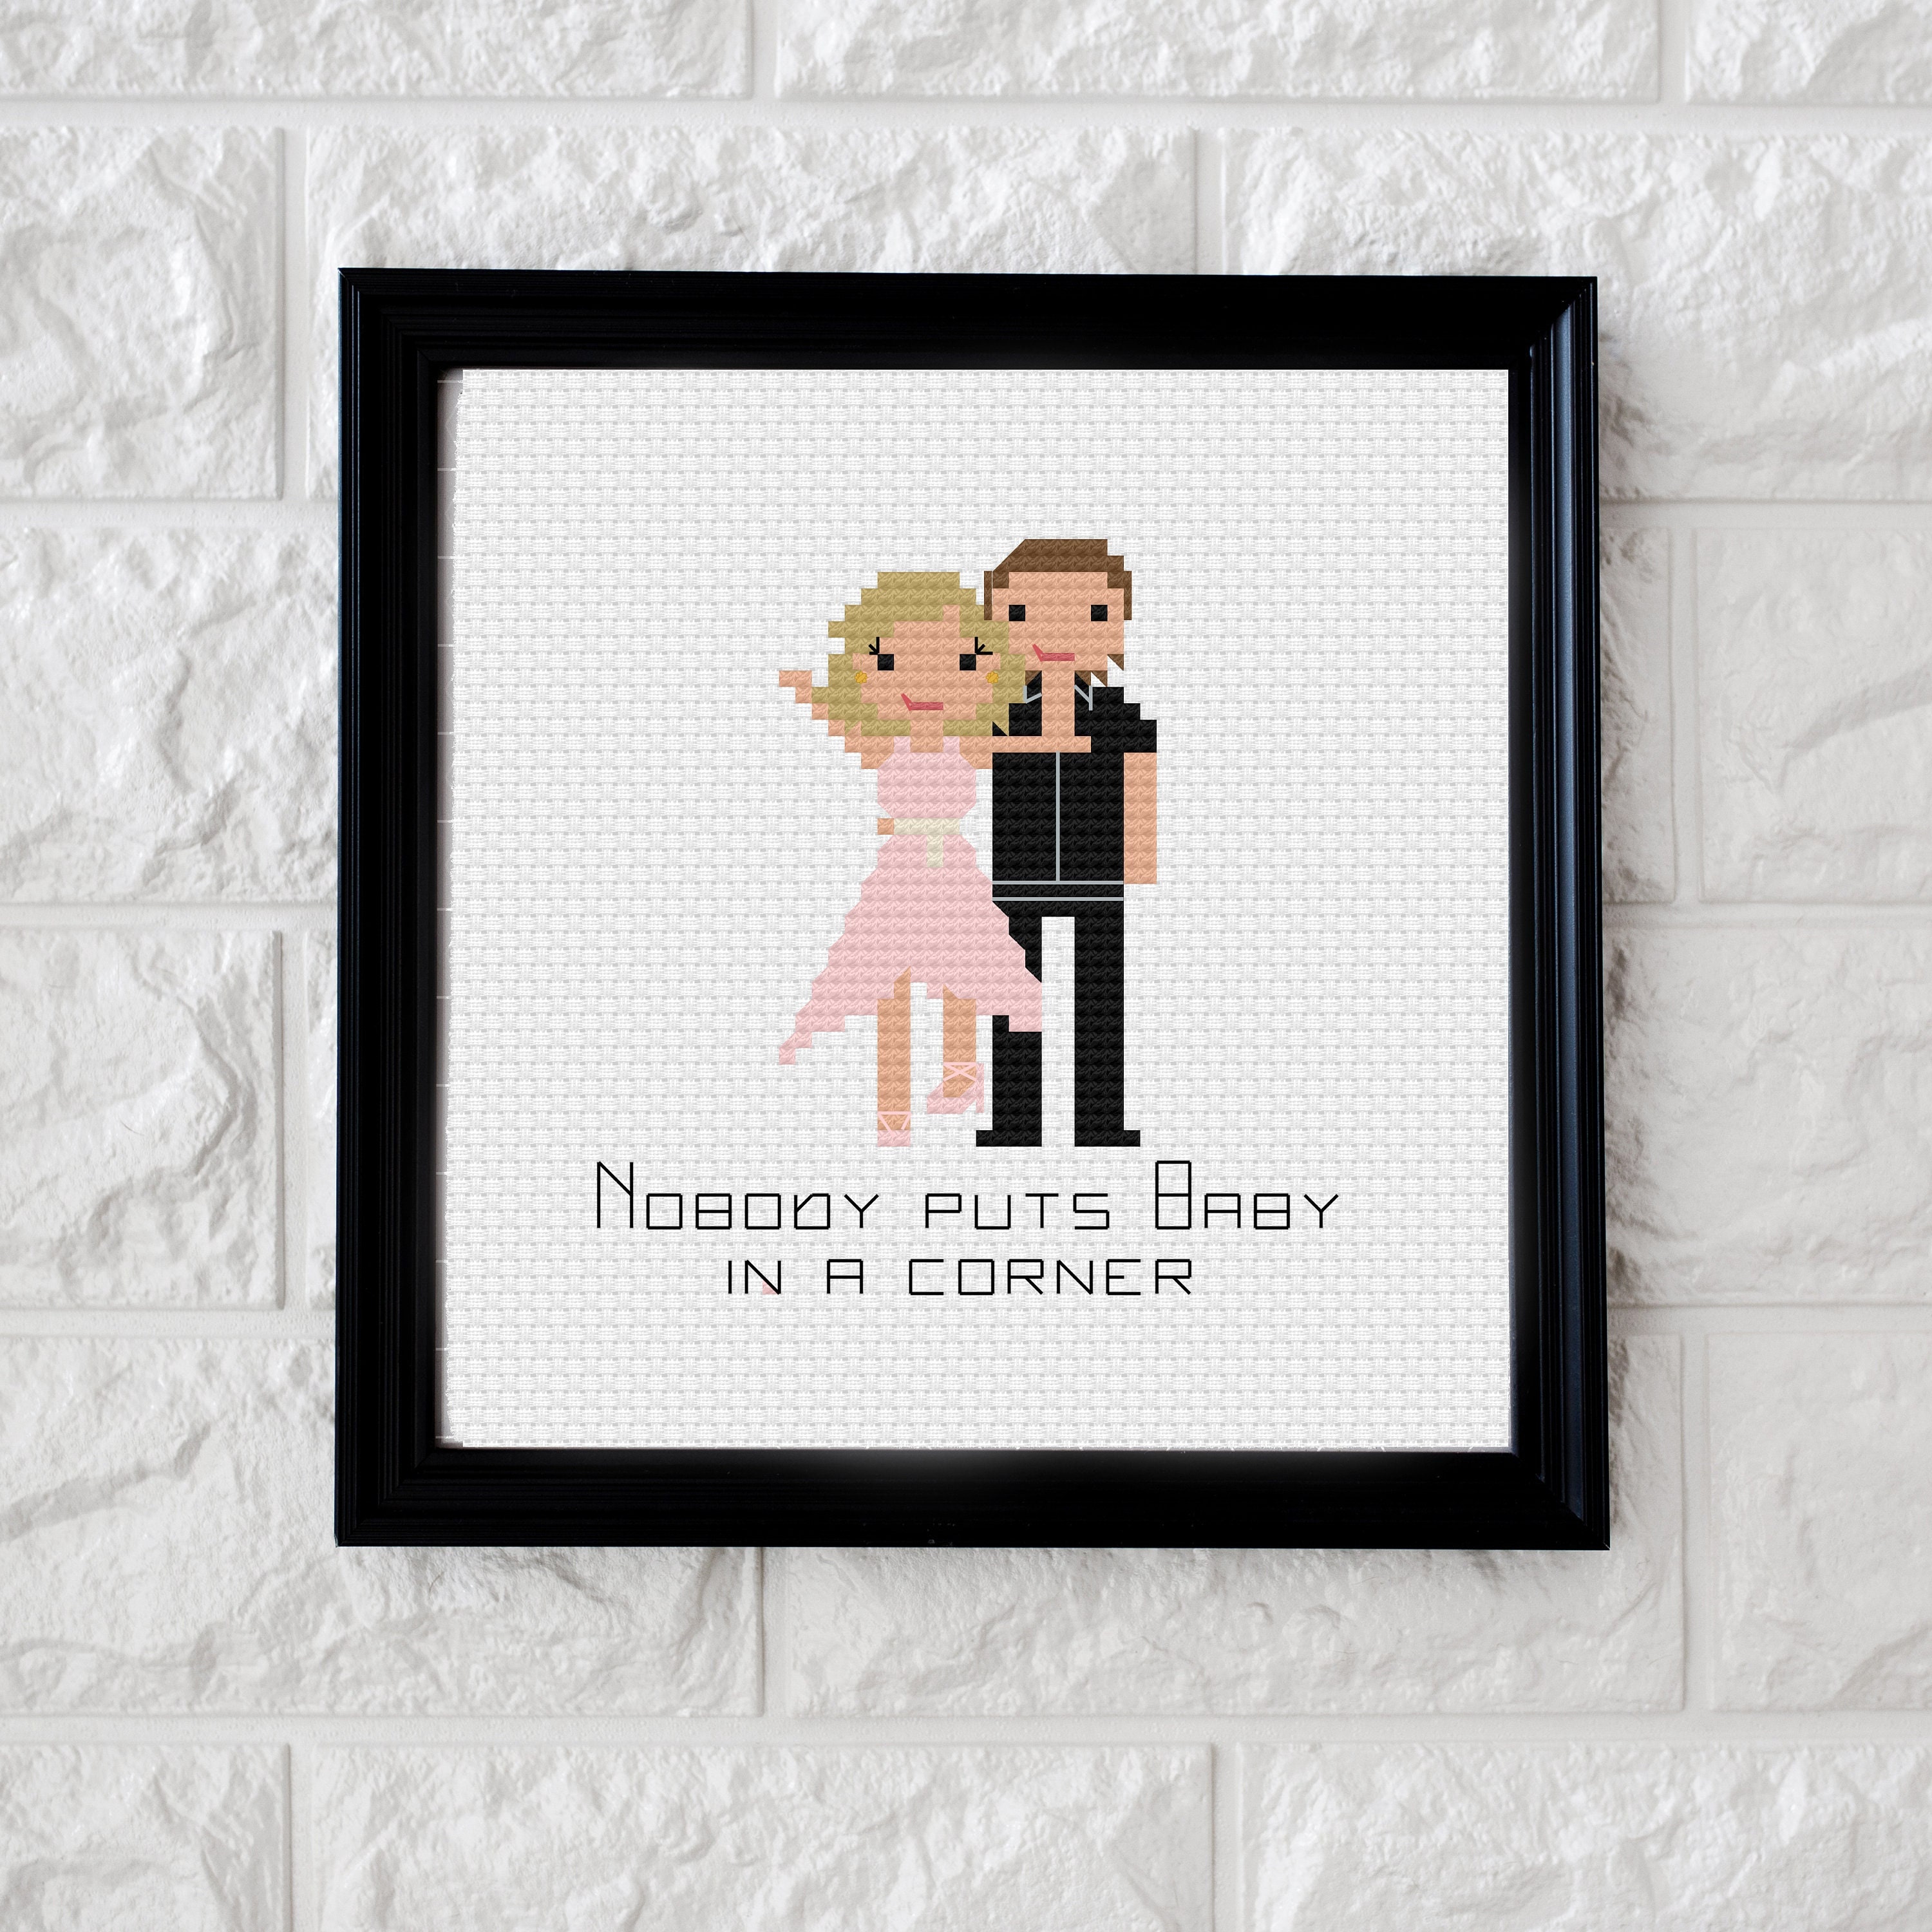 Dirty Dancing cross stitch frame / BeStitched